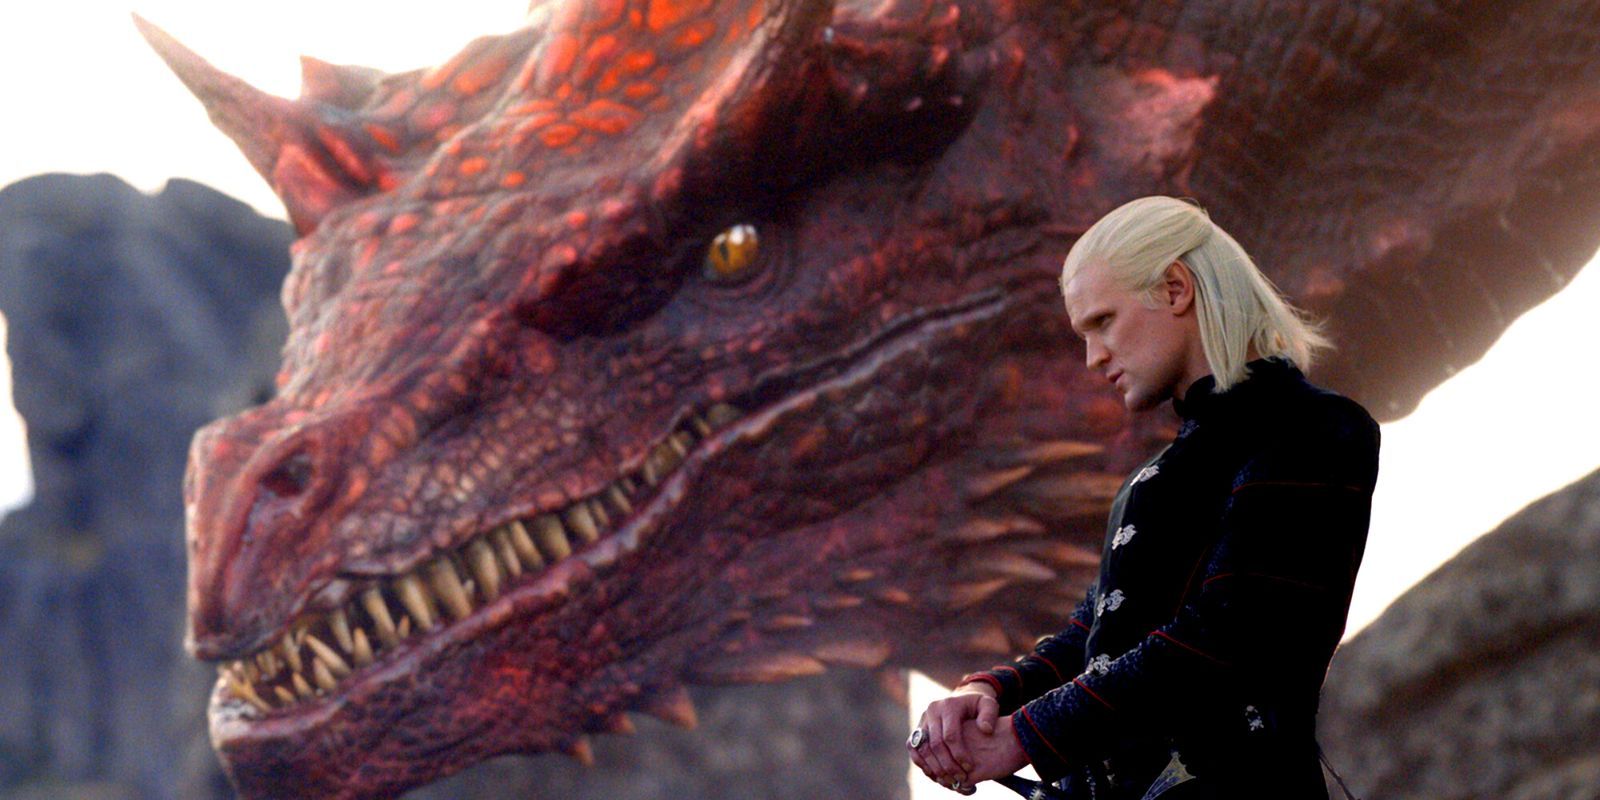 Matt Smith alongside a red dragon in HBO's House of the Dragon